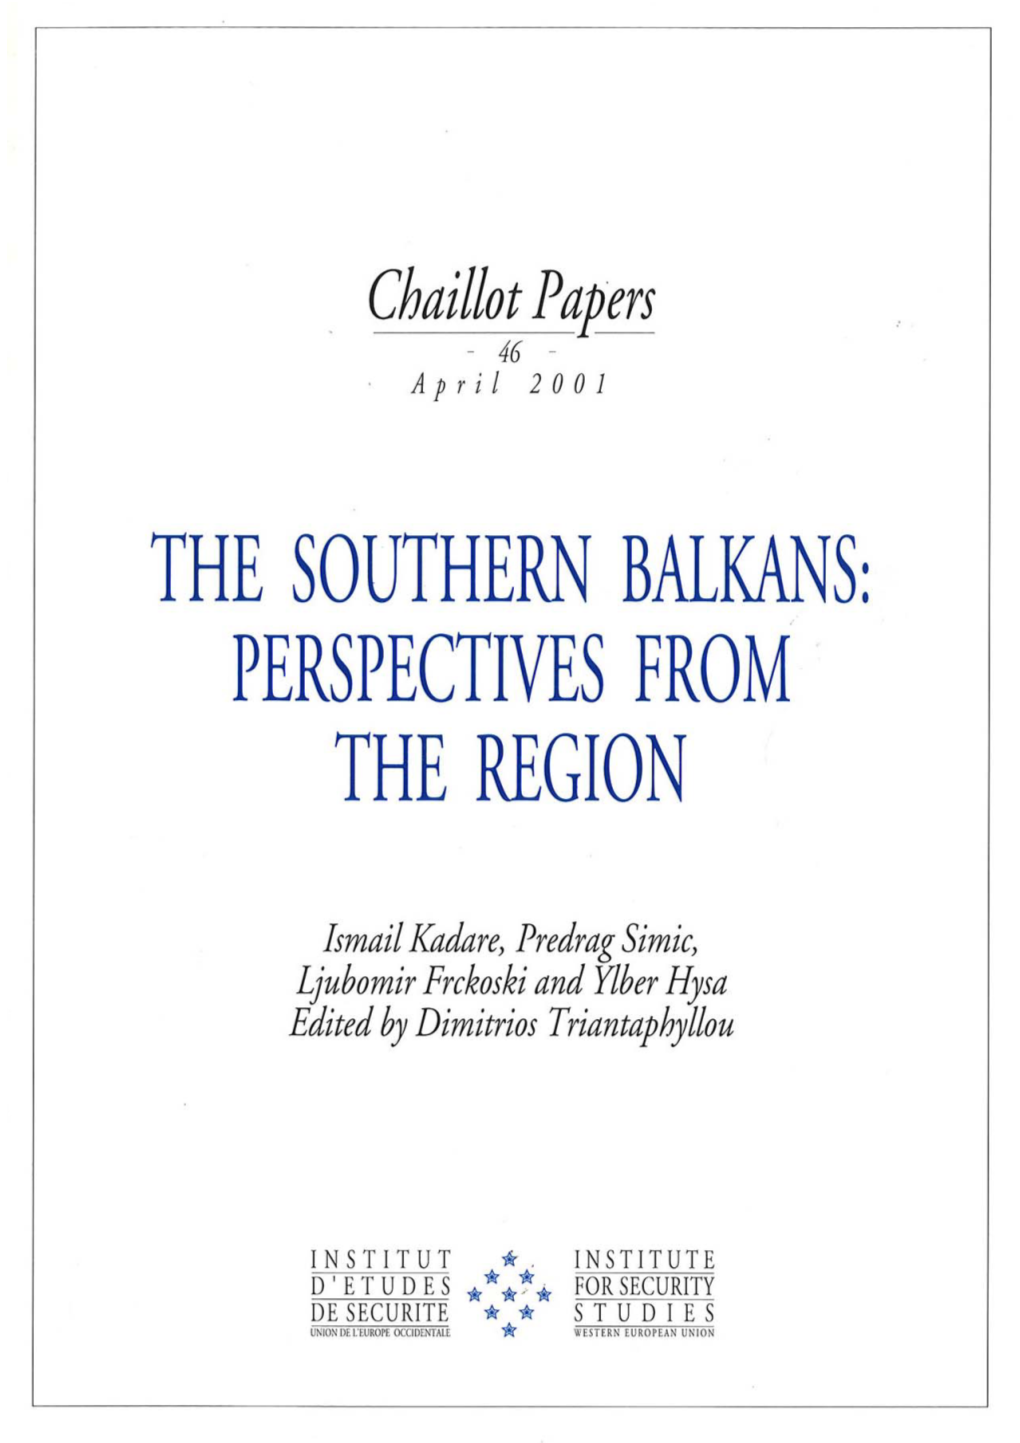 The Southern Balkans: Perspective from the Region